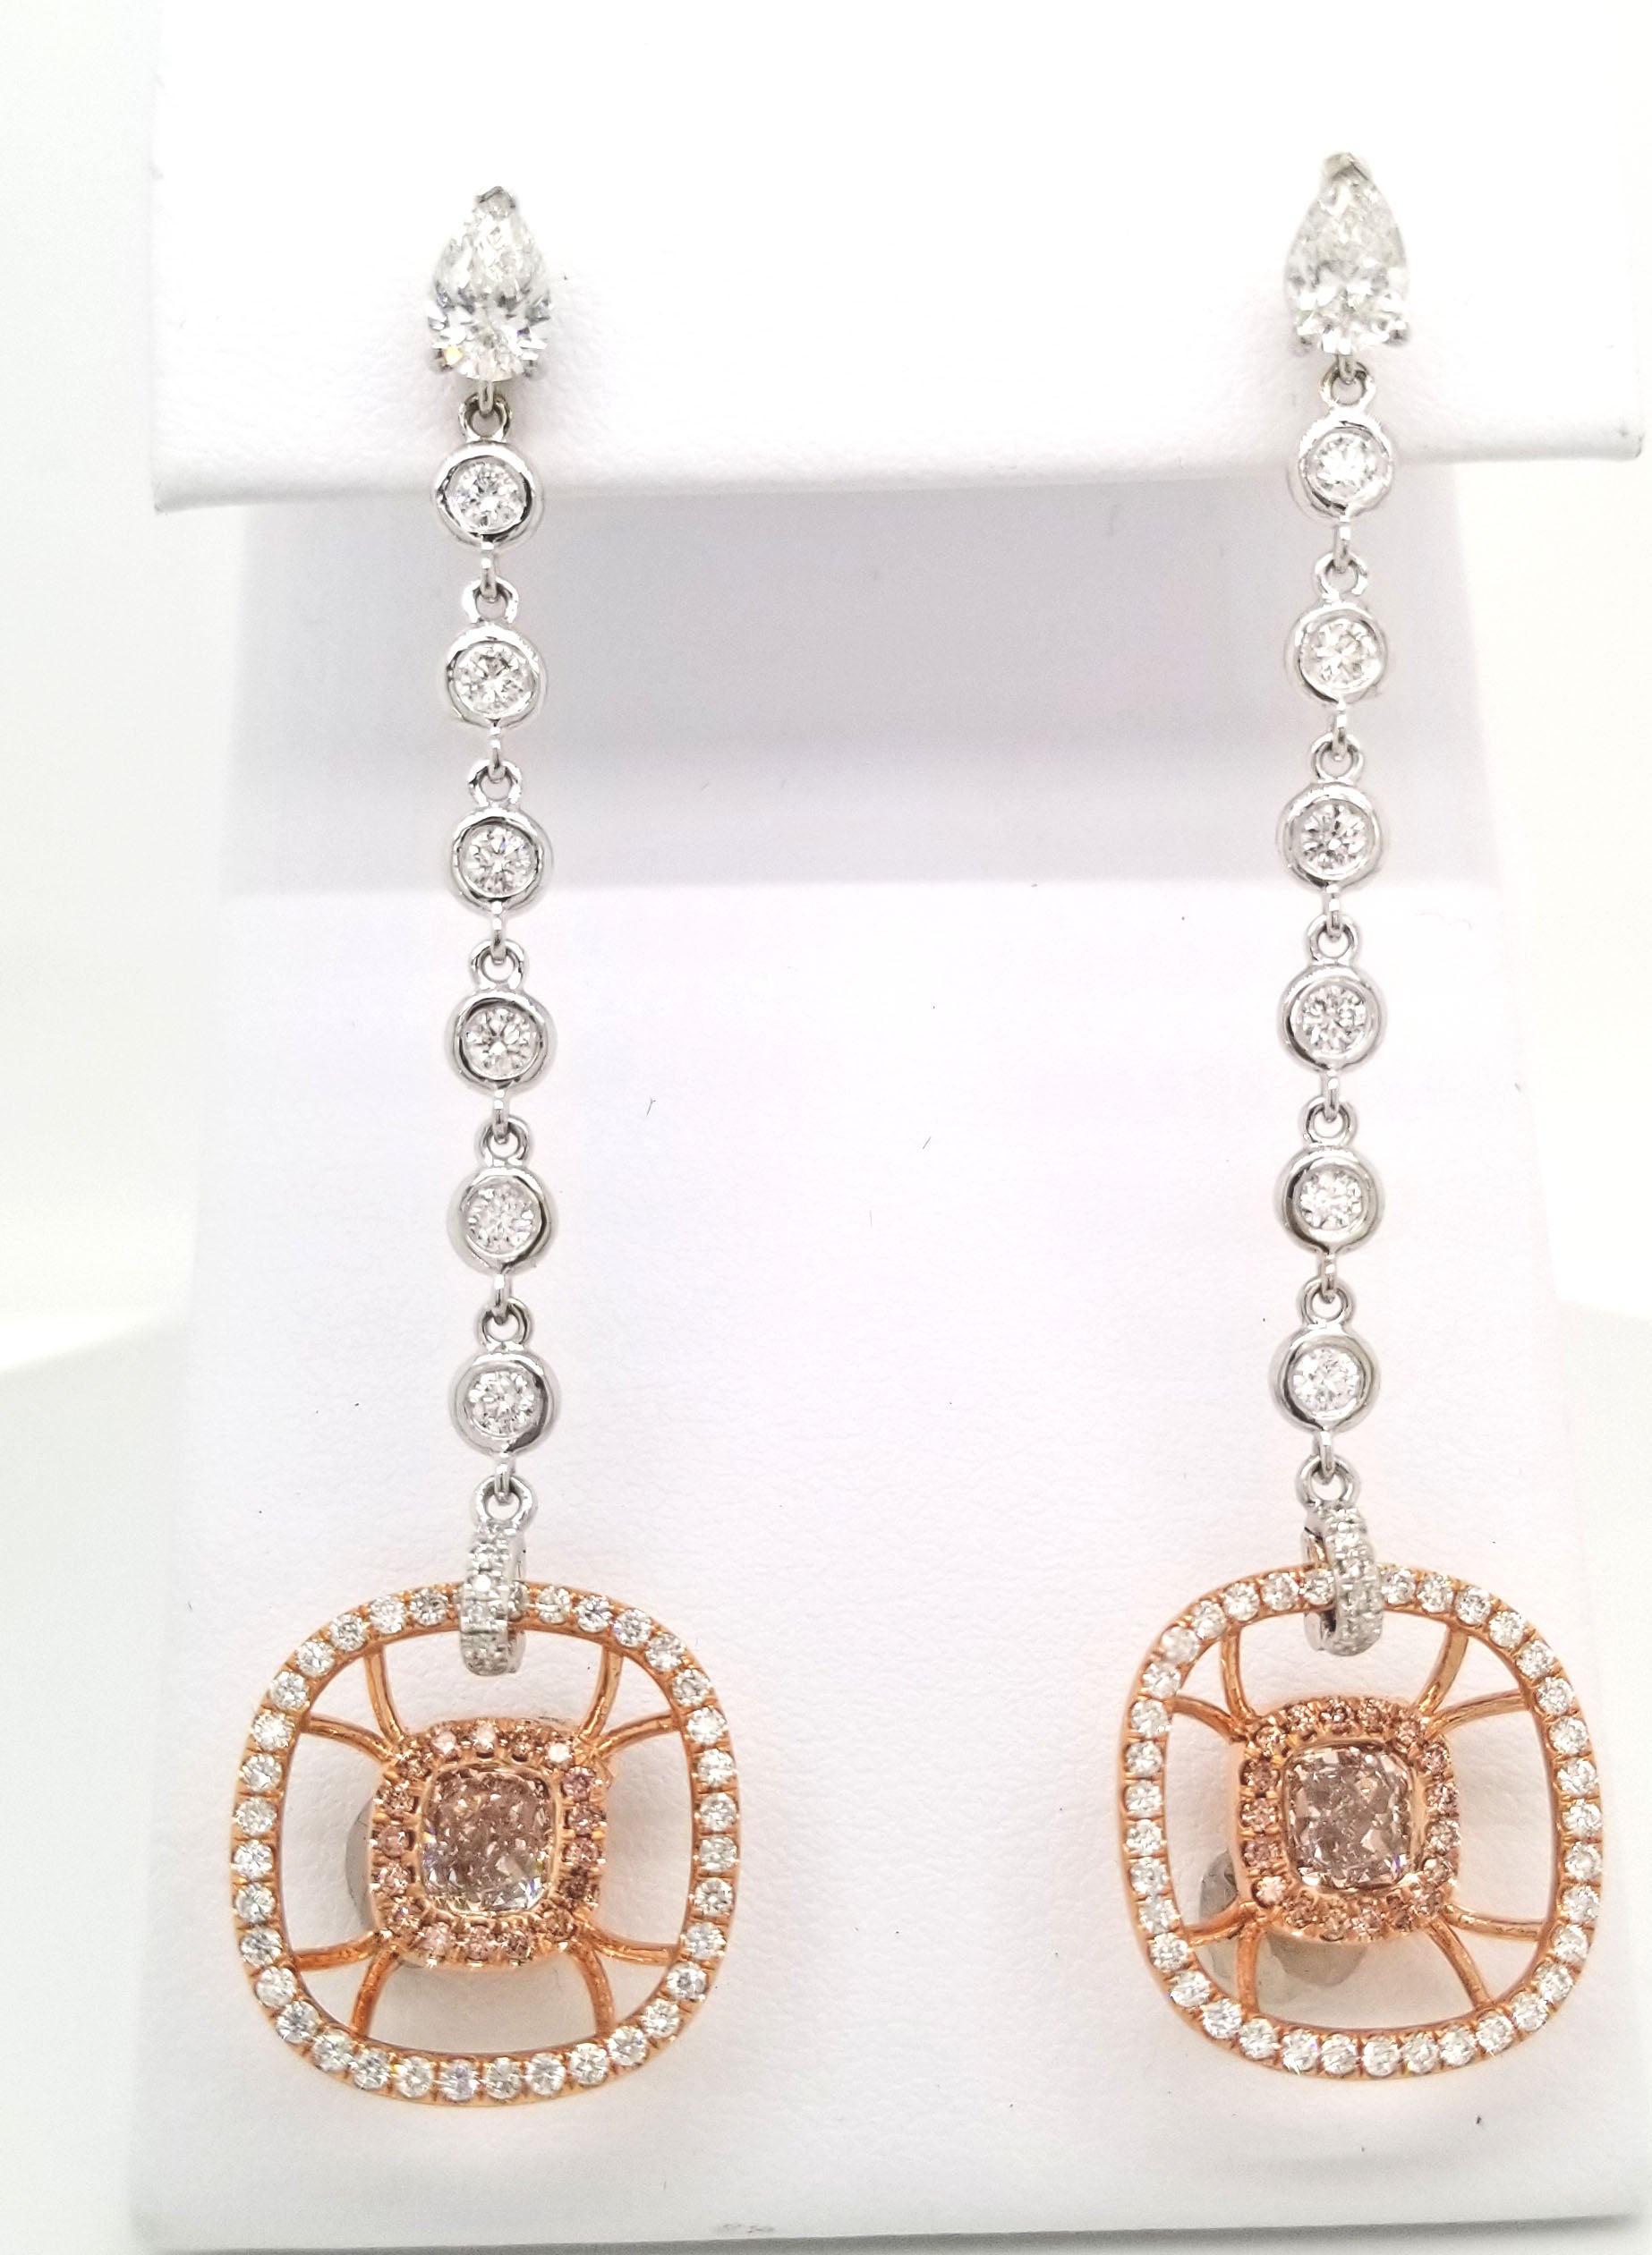 Pair of adjustable, 18K Rose Gold Dangle Earrings with 1.49 carats of GIA Certified Light Pink Diamonds. Rounded square basket and upper dangle encrusted with over 140 rhombus, round brilliant and melee cut white diamonds, total carat weight 4.66.